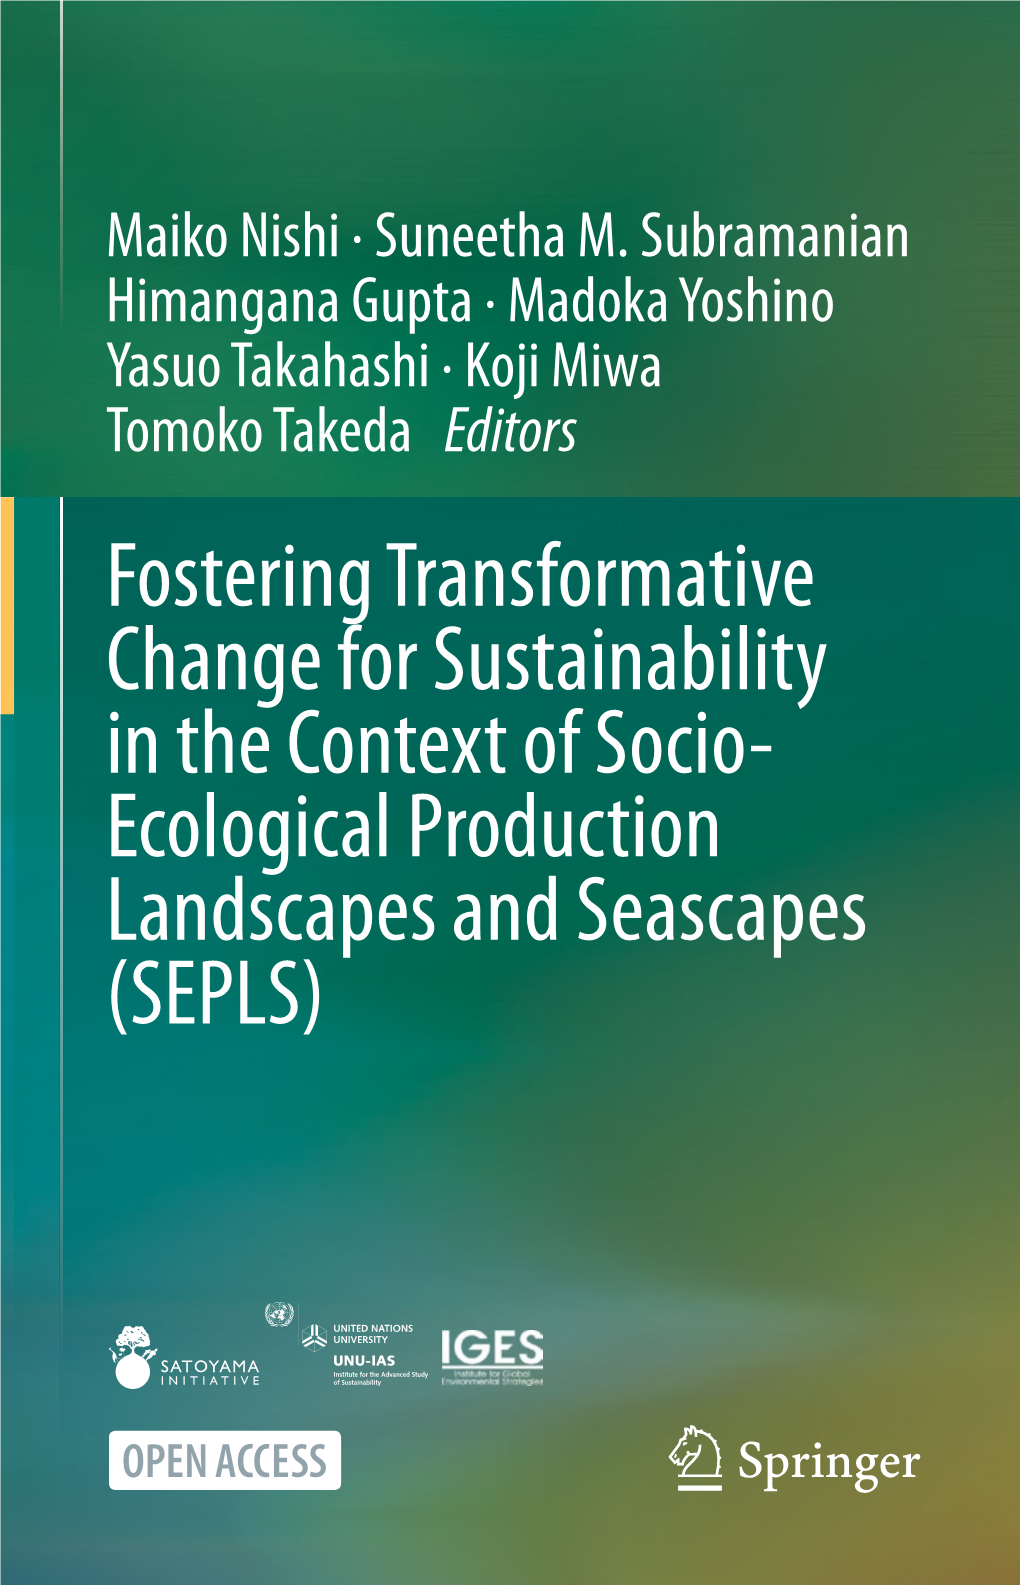 Ecological Production Landscapes and Seascapes (SEPL